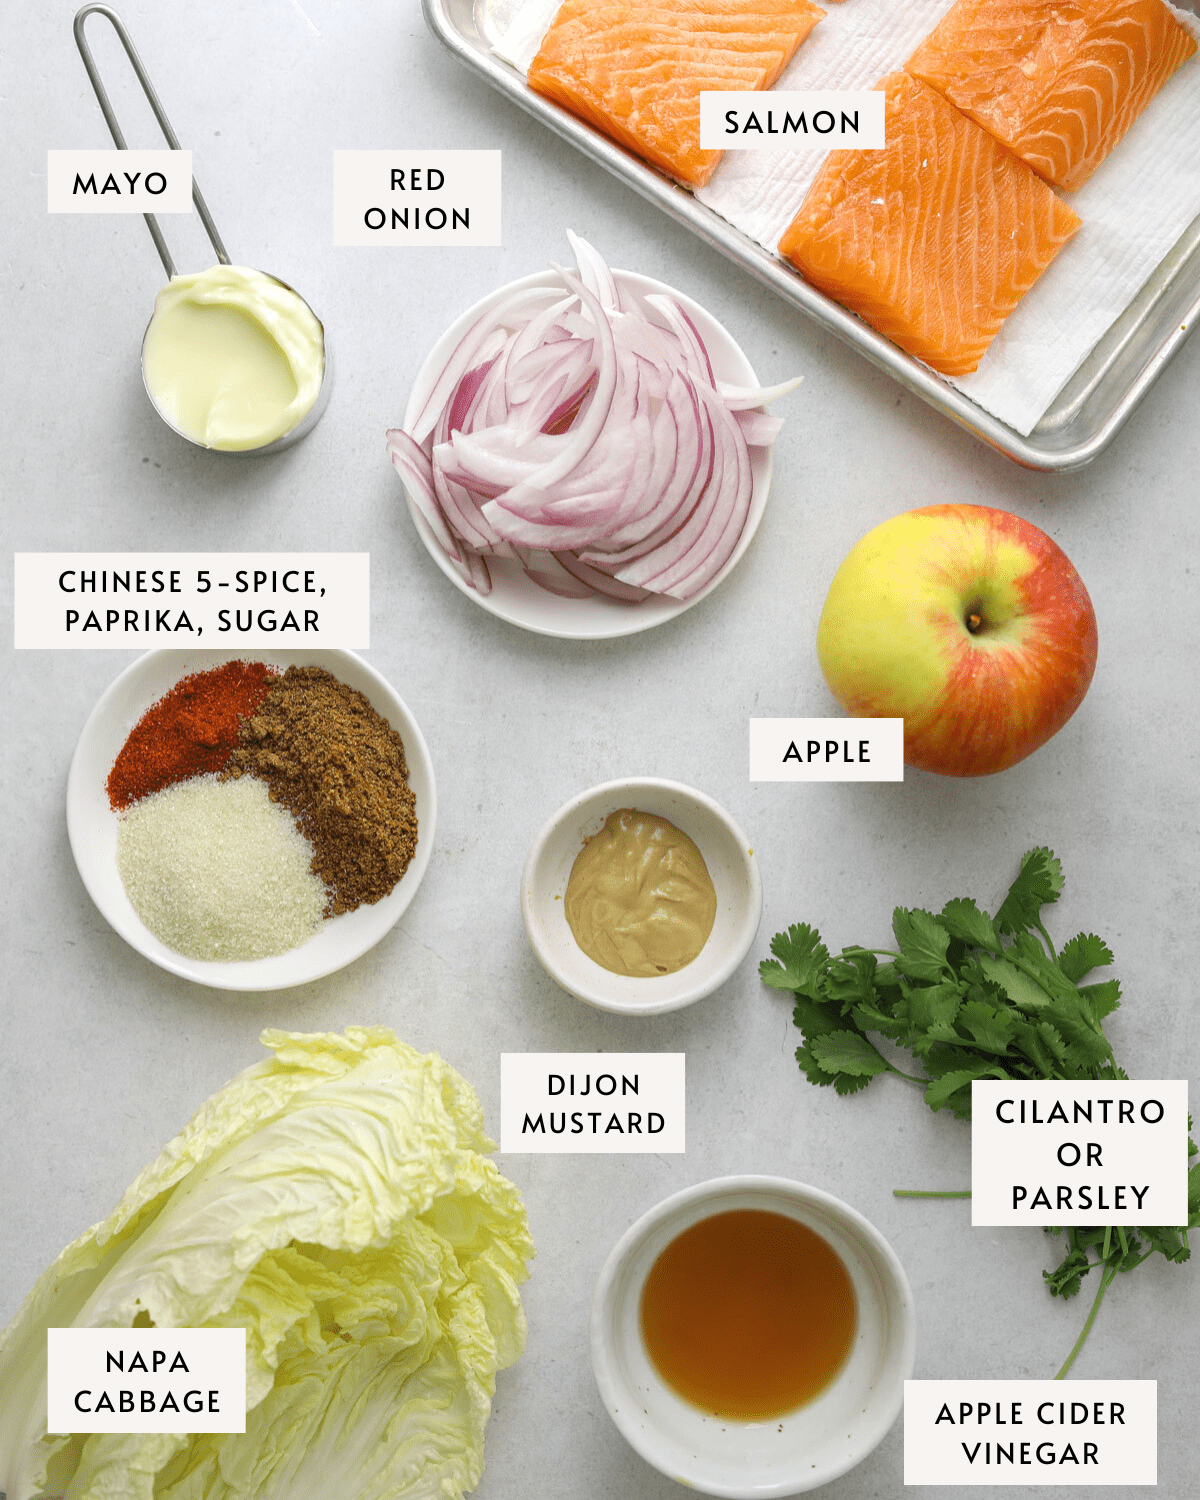 recipe ingredients on a blue background: raw salmon filets, mayo, spices, cabbage, vinegar, apple, etc.